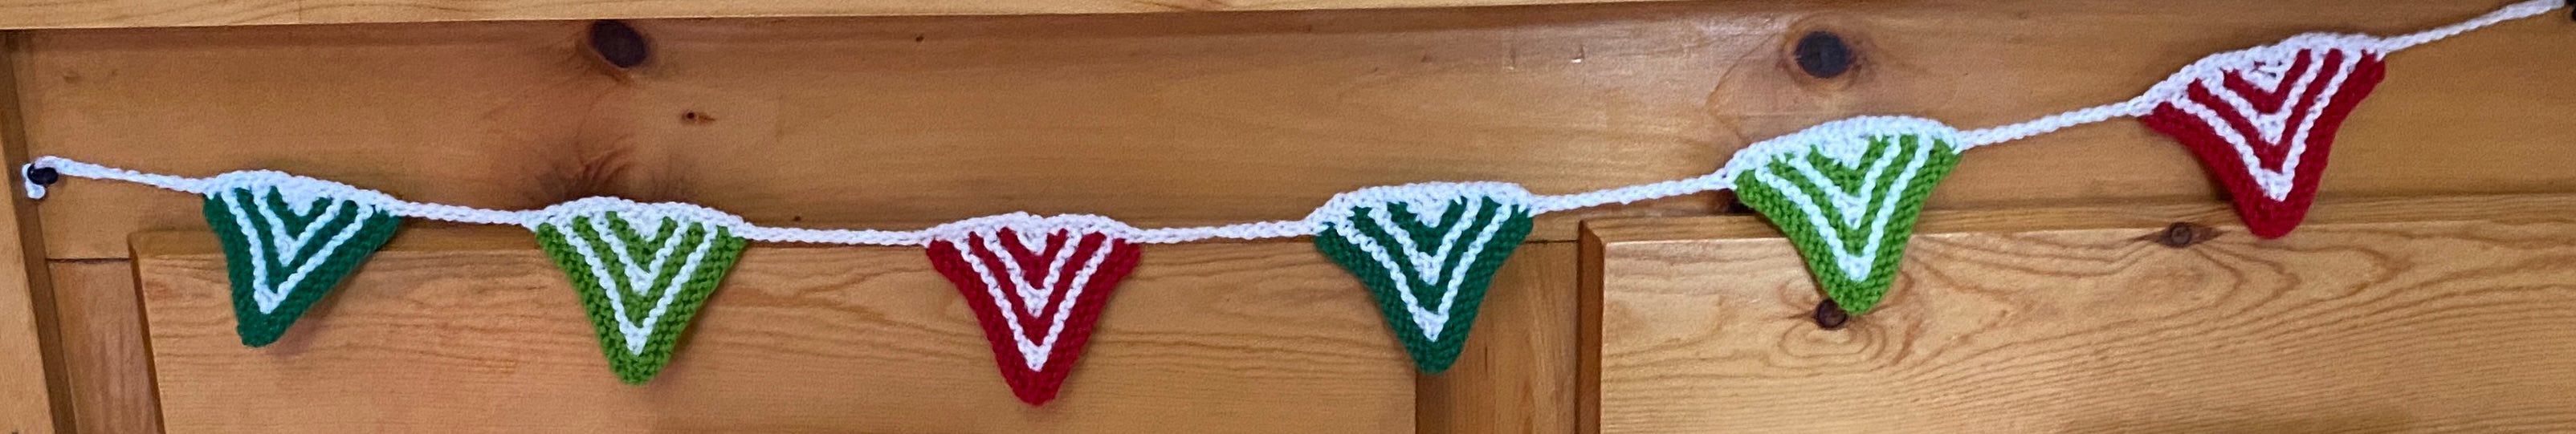 Hand Knit Holiday Bunting by Valerie Knits - 2291